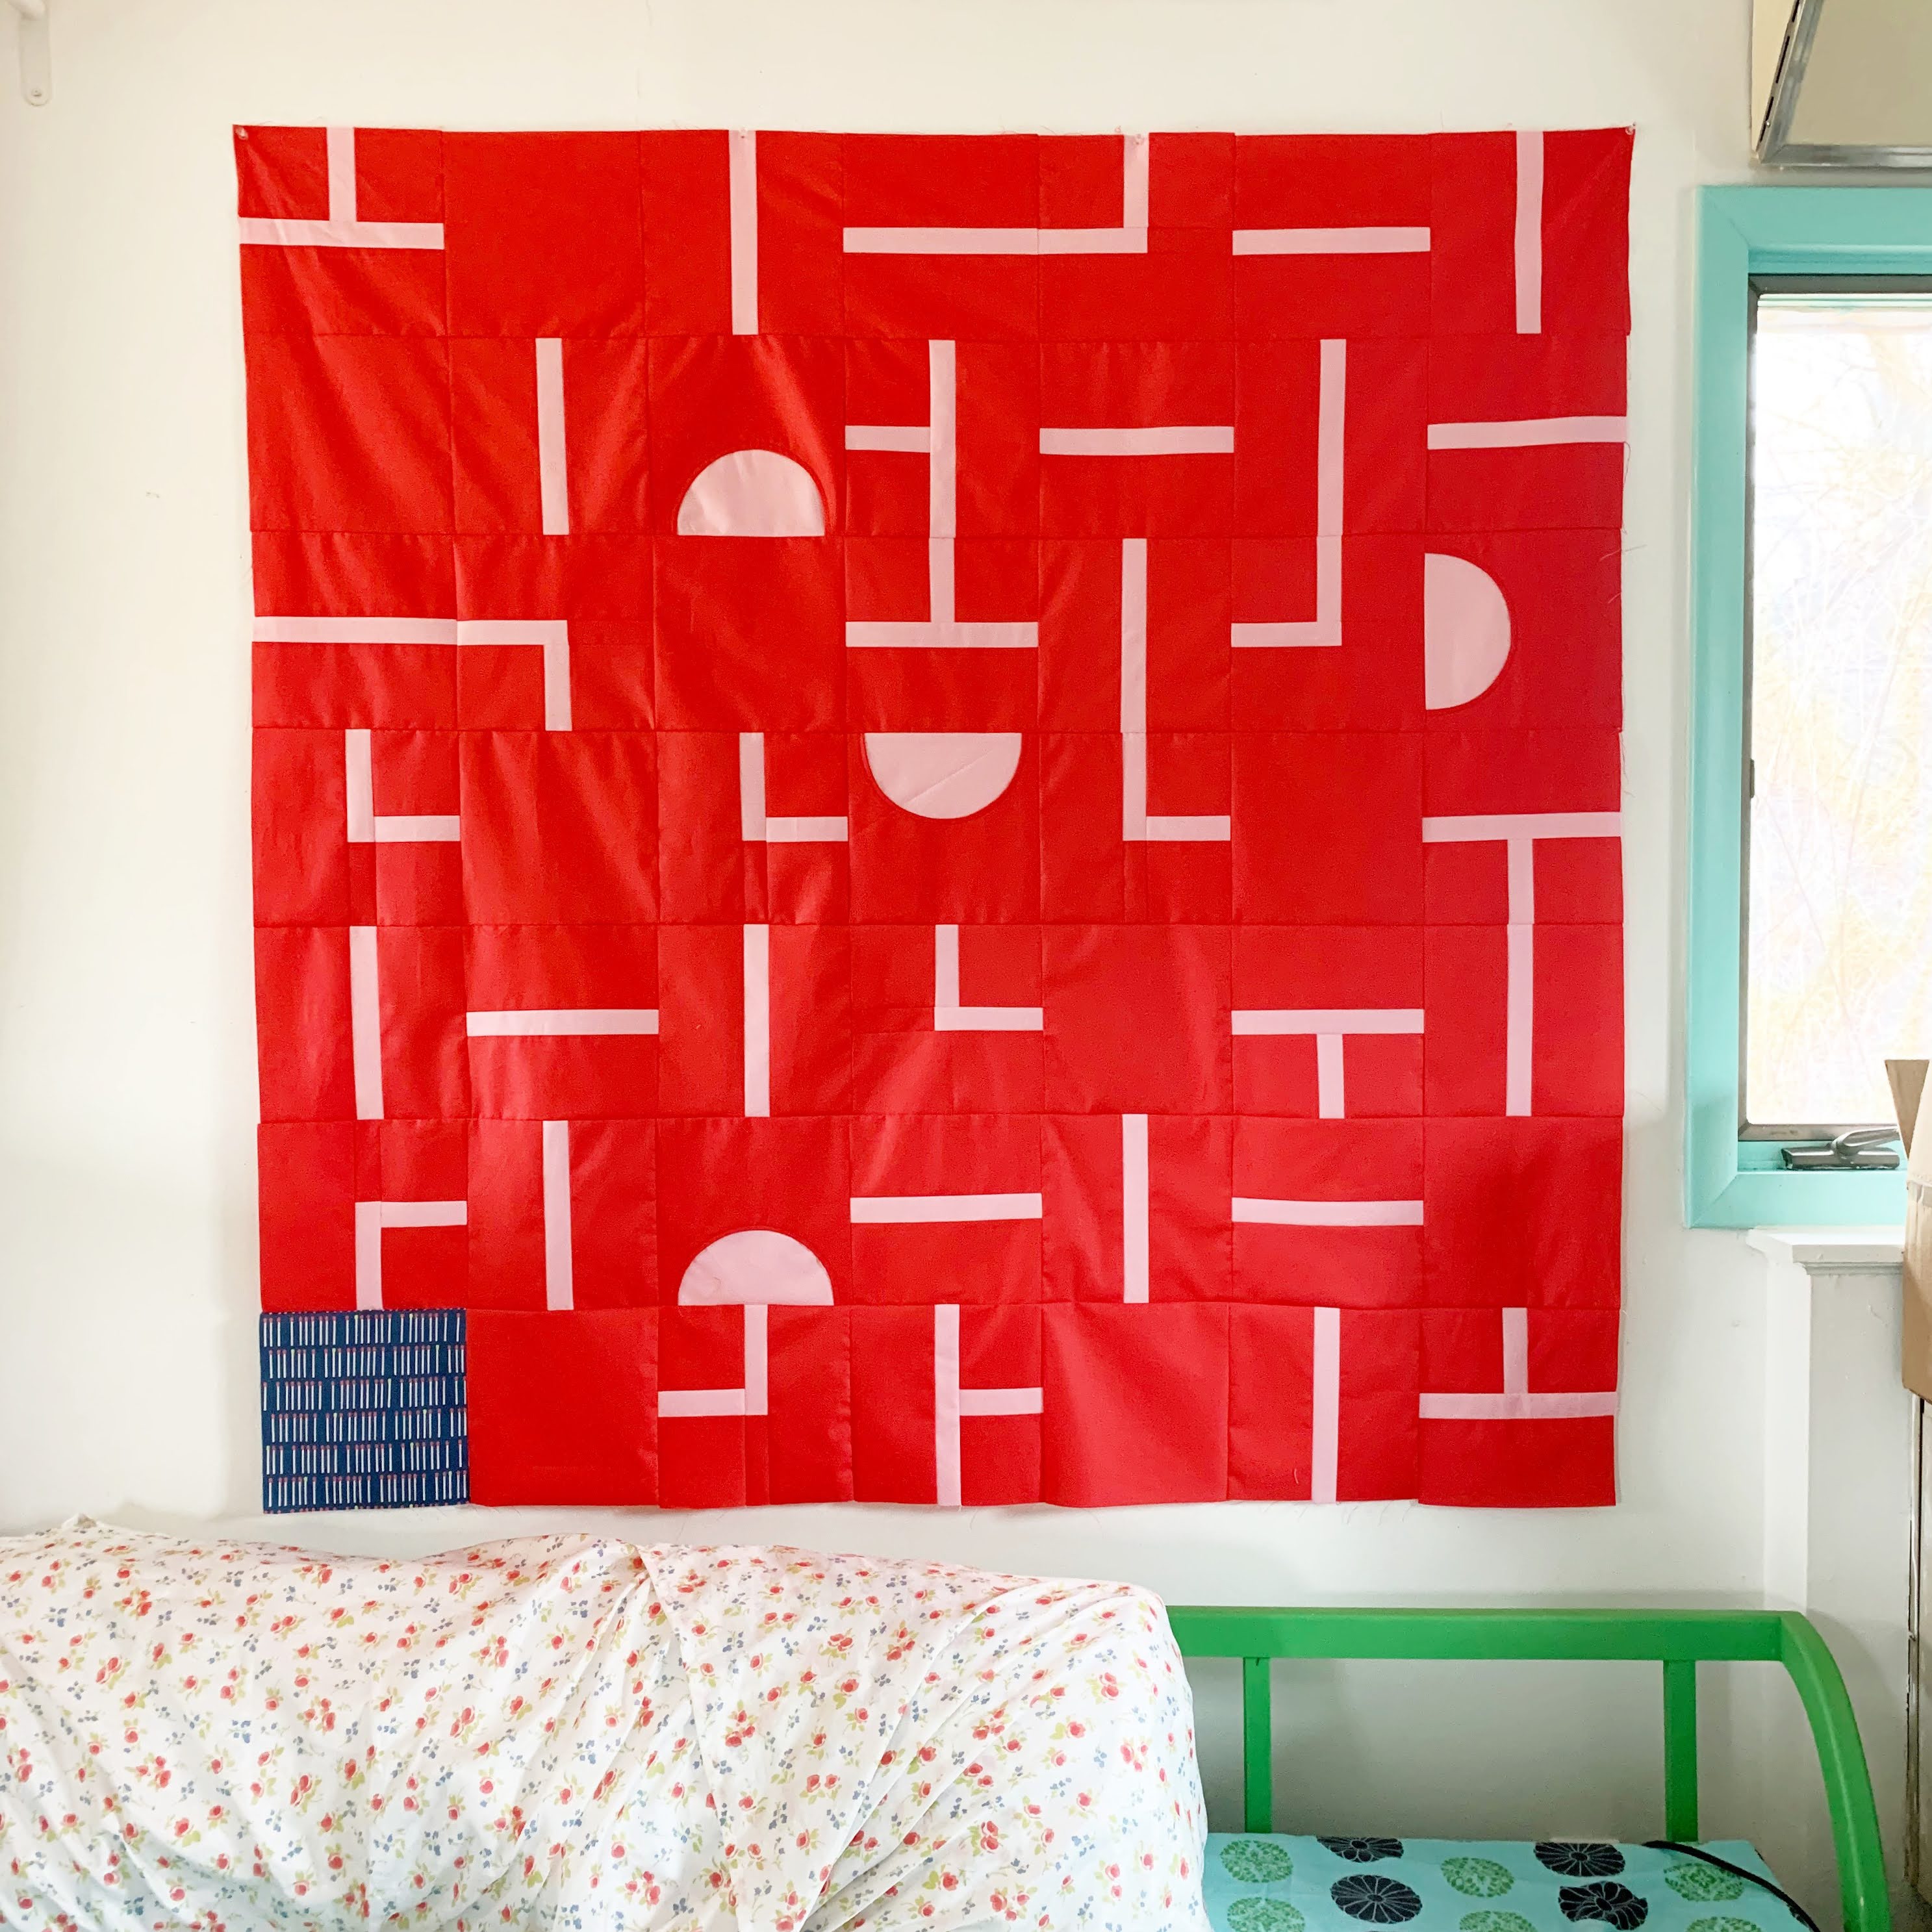 The Drexel Tile Quilt by Rossie Crafts is a fun, fast, and fresh quilt that can be made in almost any color combination